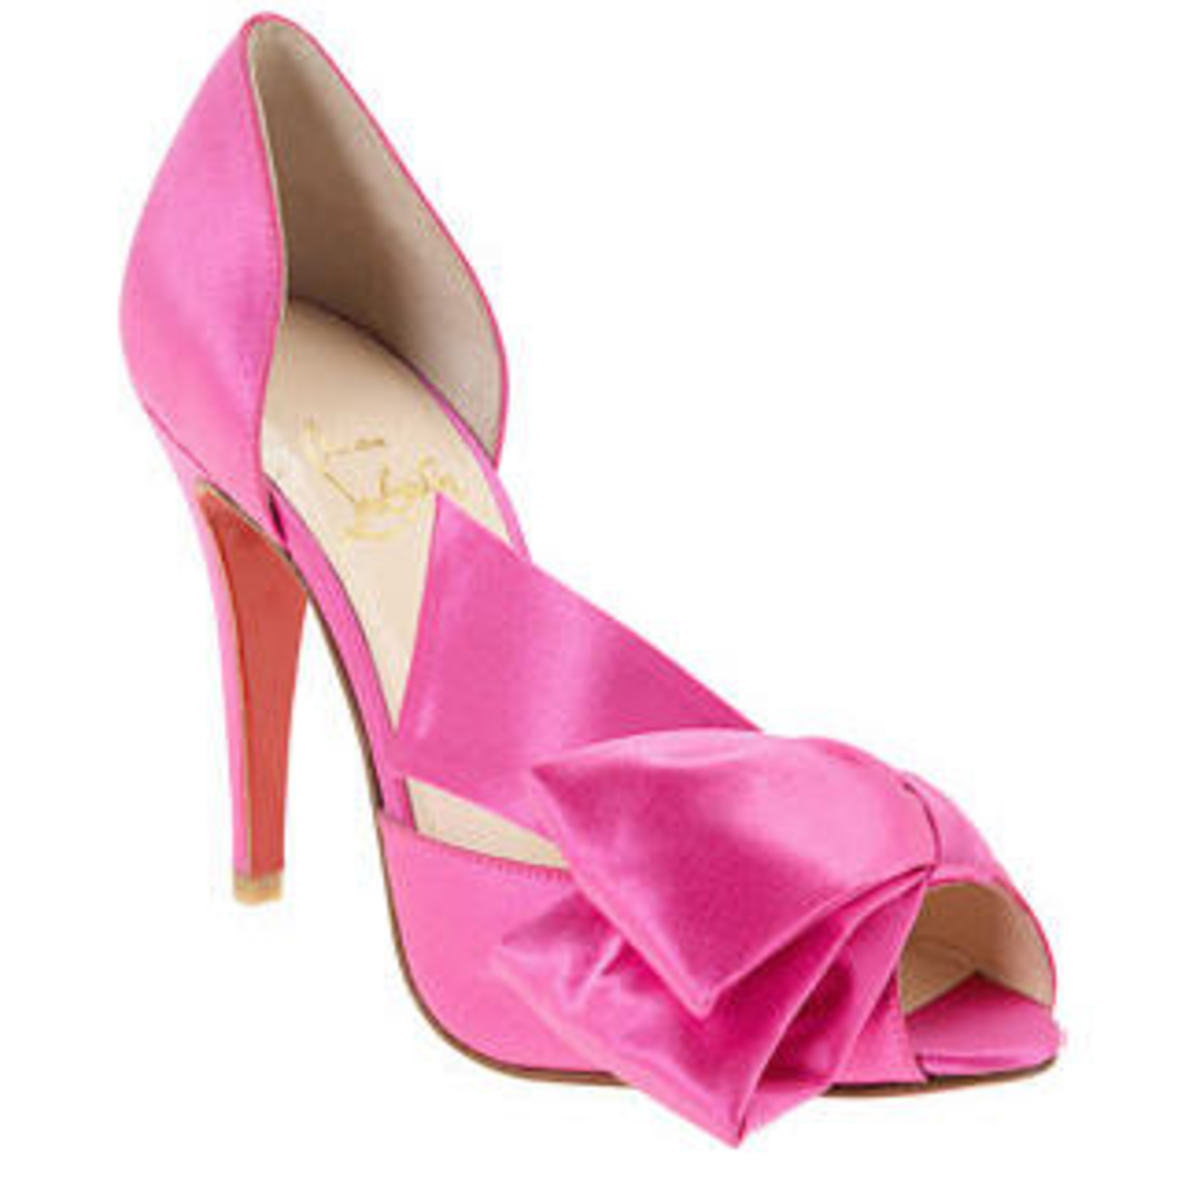 How to Dye Wedding Shoes | HubPages